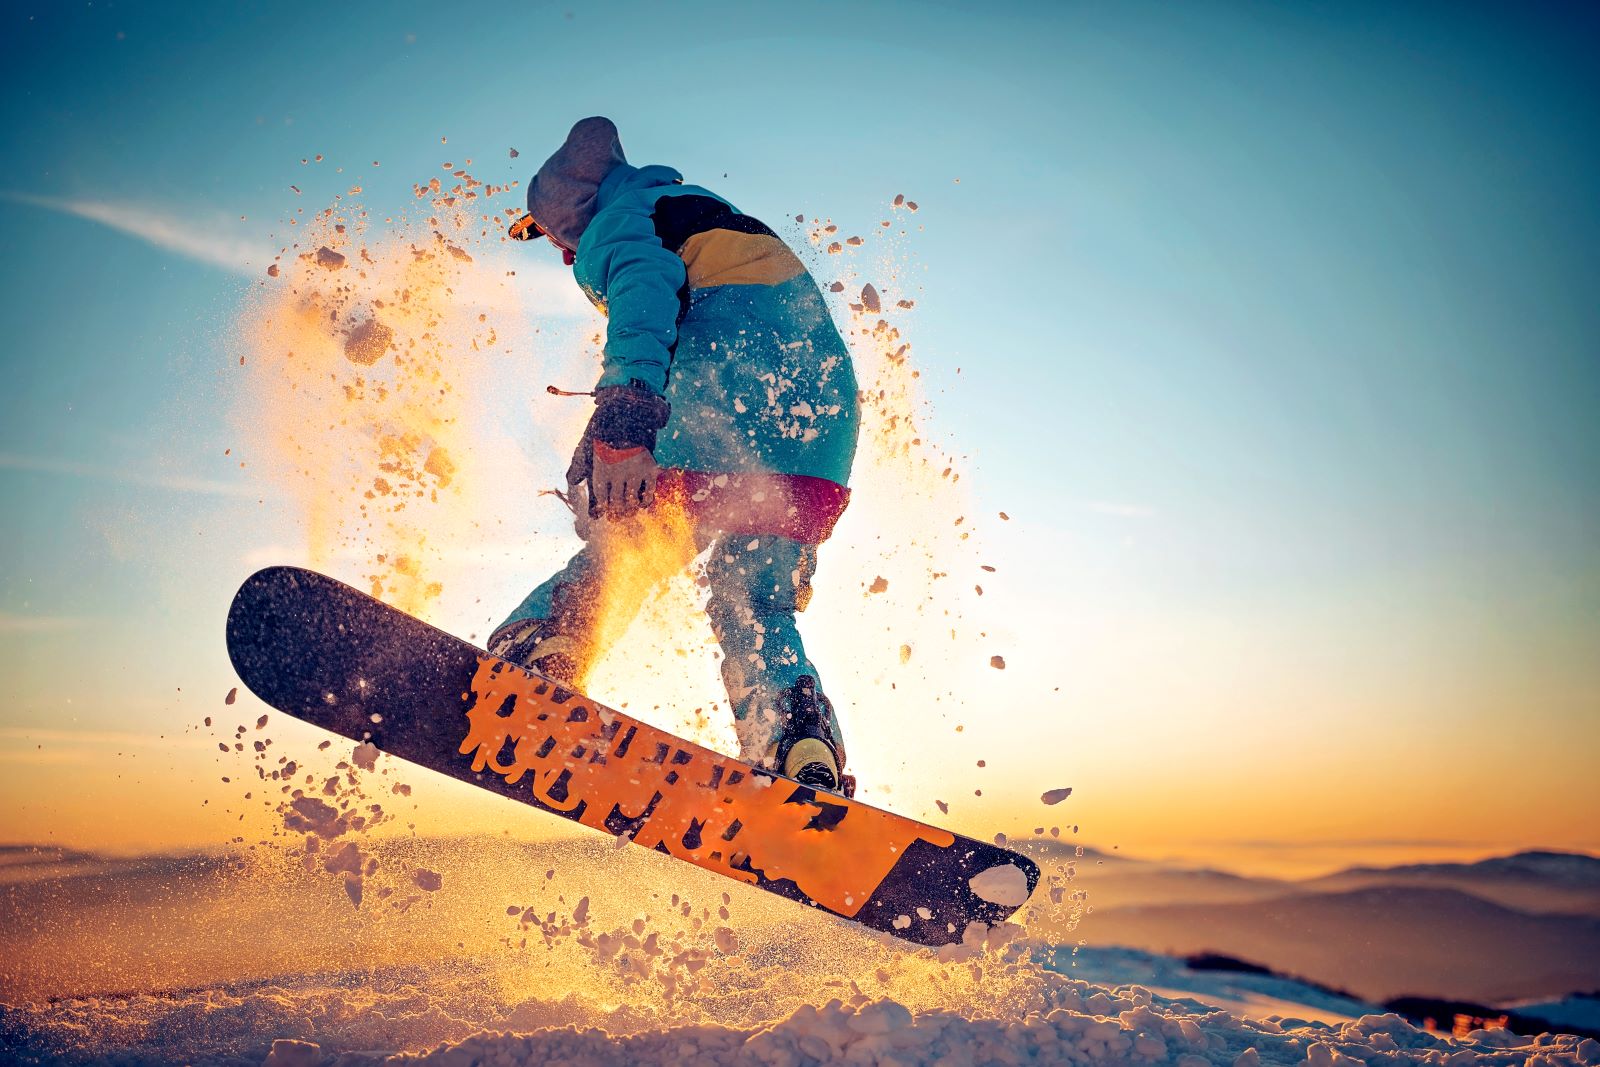 4 Tips for Avoiding Skiing and Snowboarding Injuries